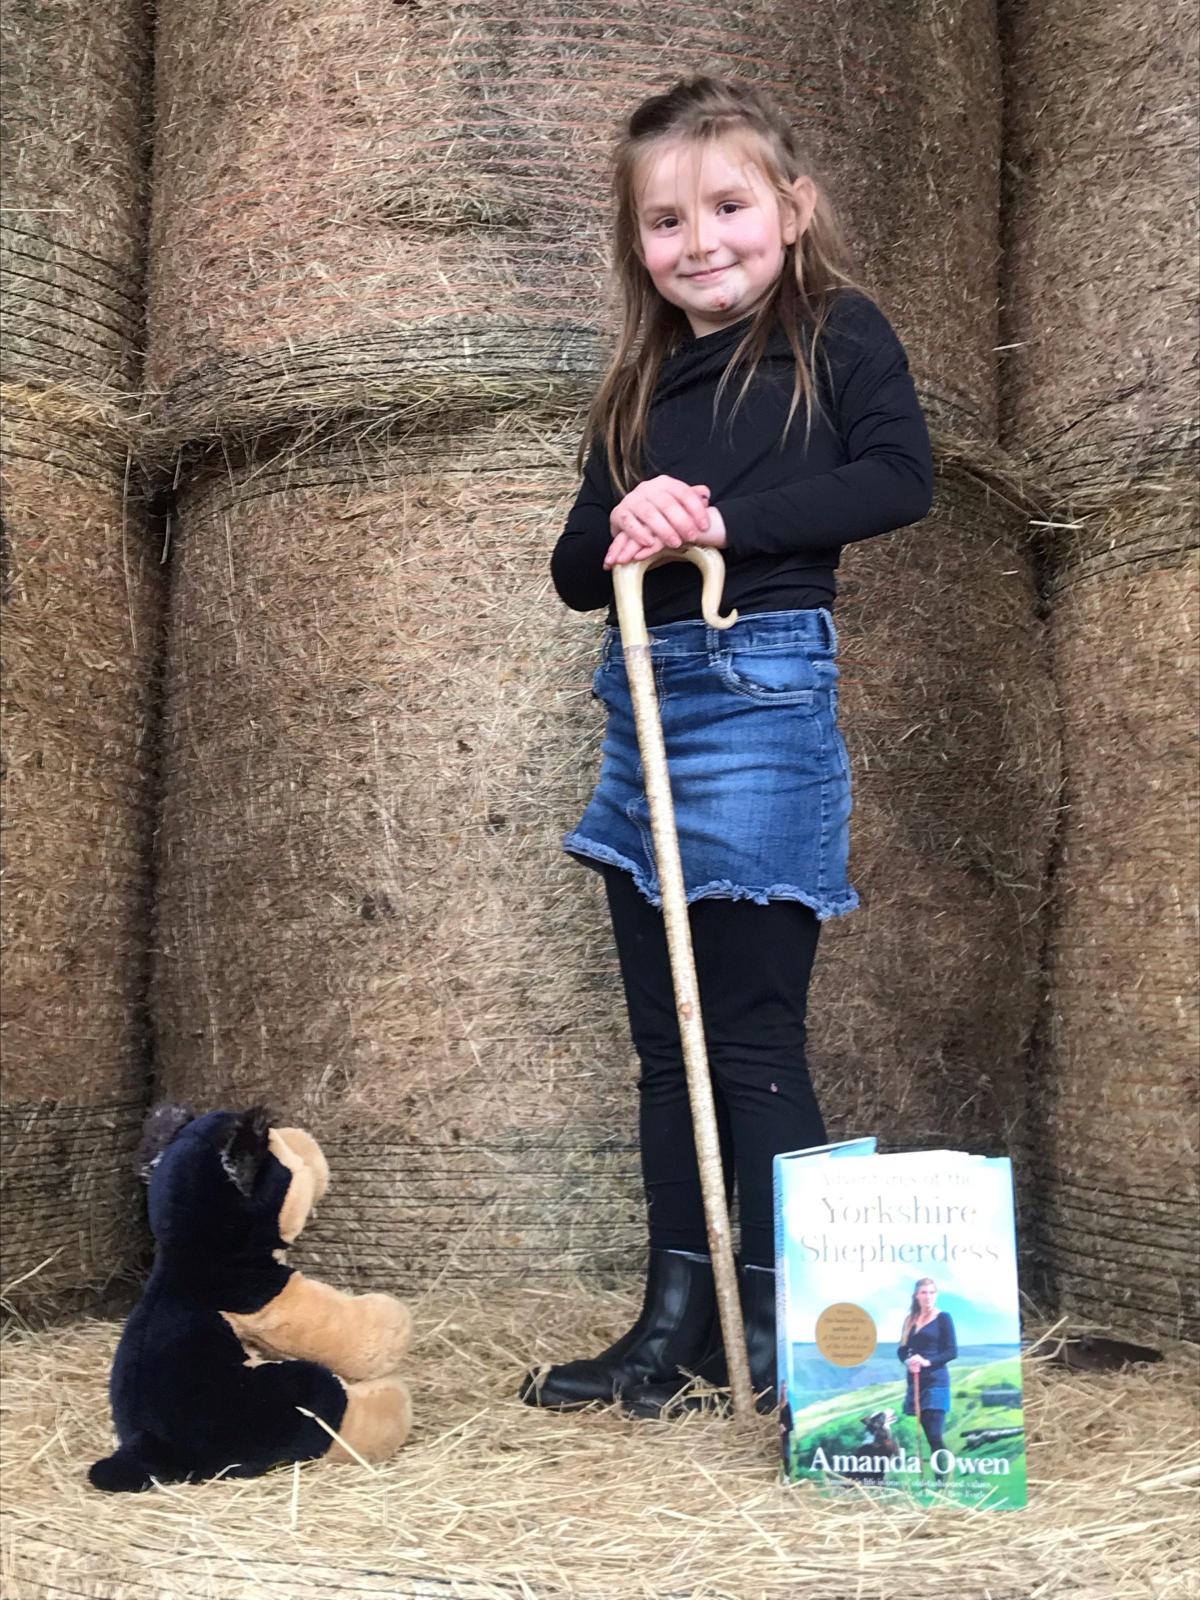 Christa Dunn - This is our daughter Amber Dunn from Redhall Farm, Gargunnock